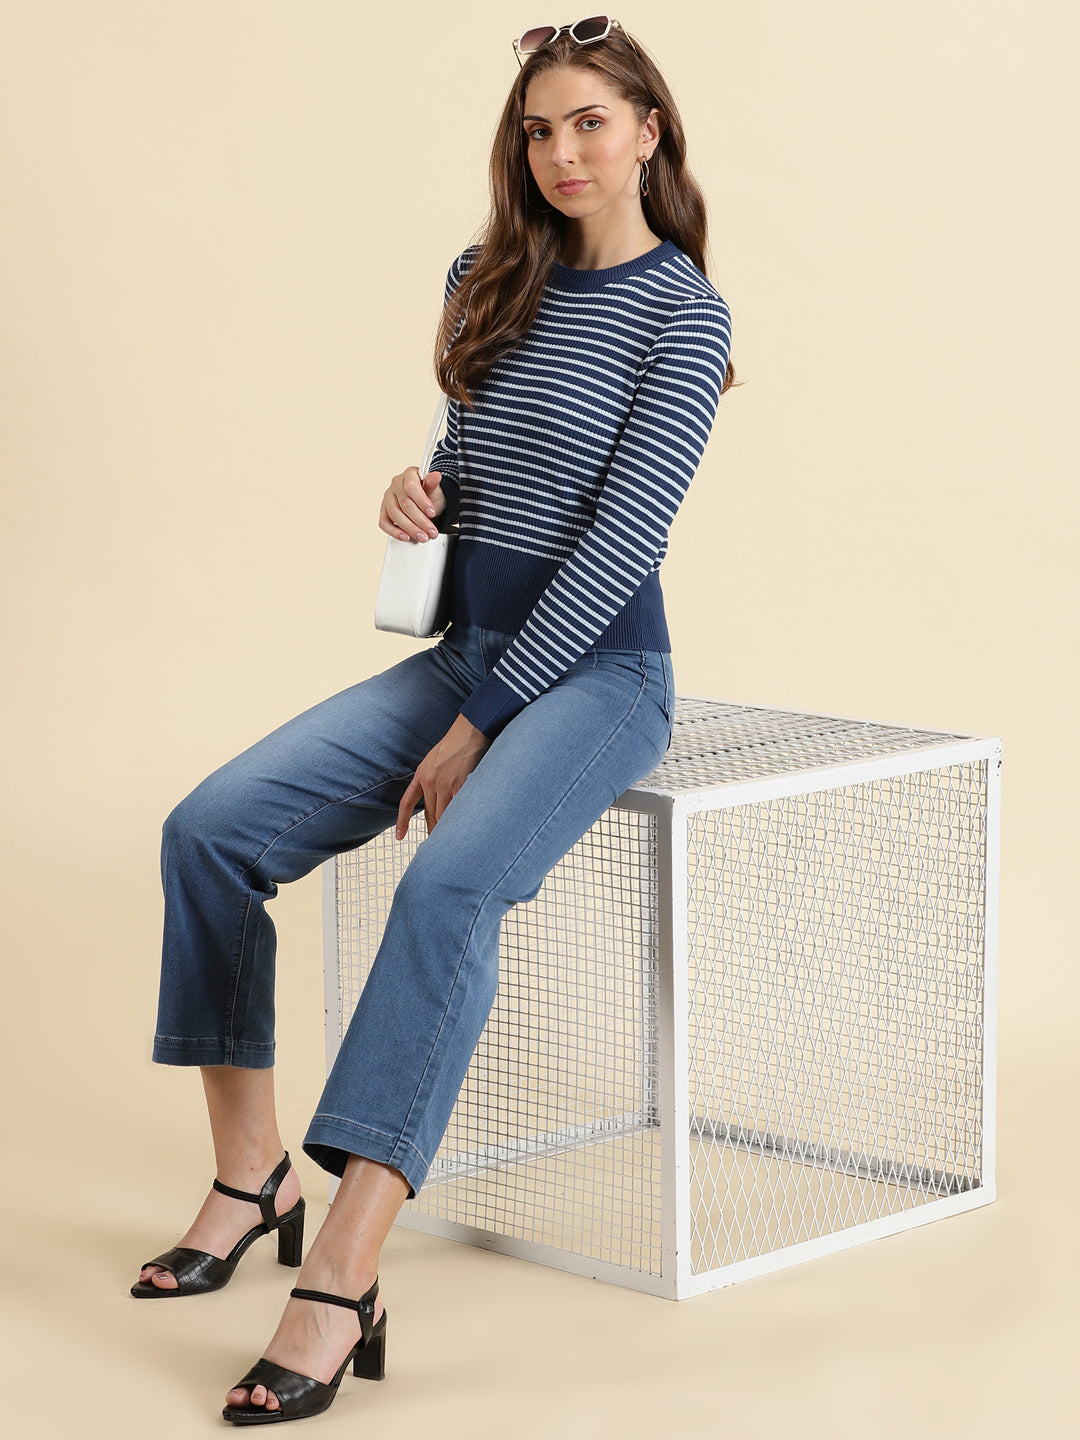 Women's Navy Blue Striped Fitted Top